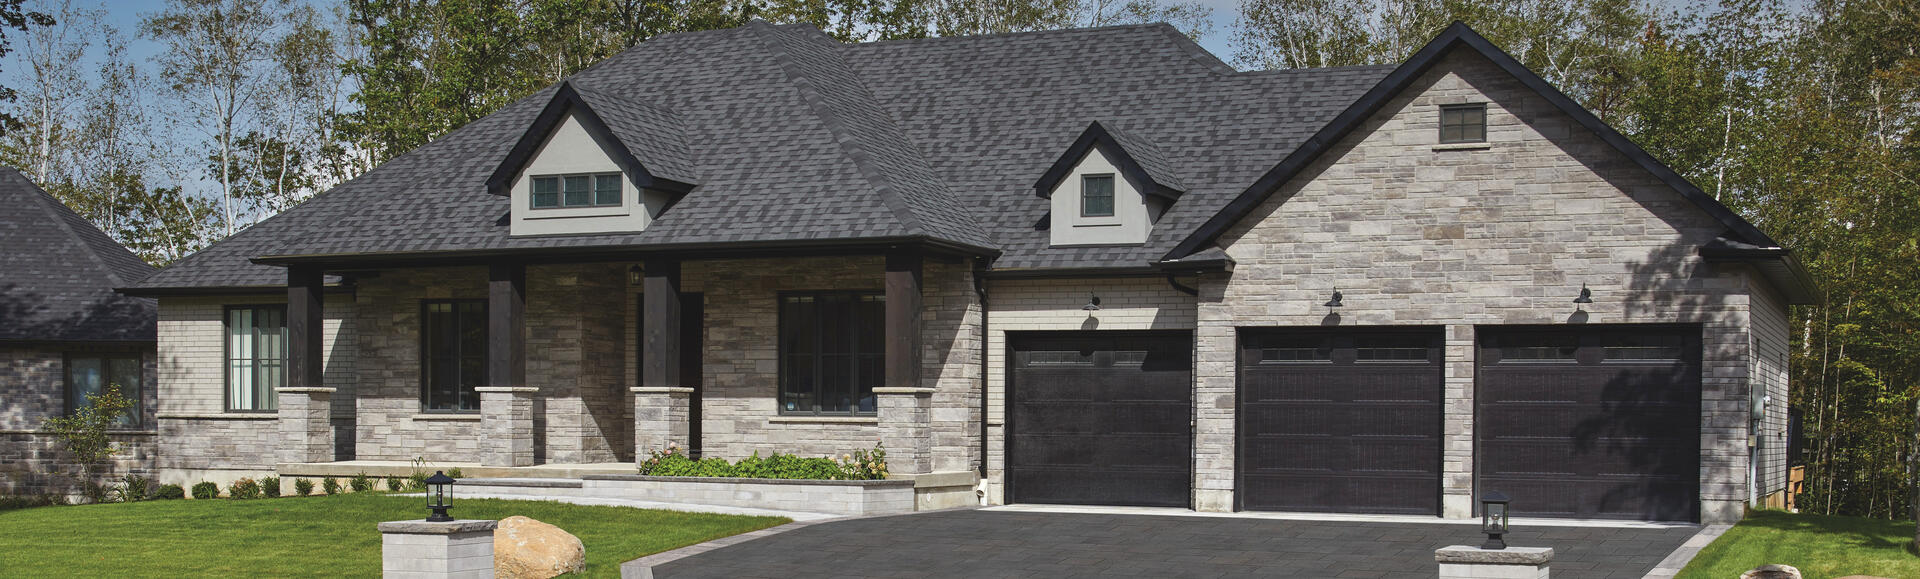 House using stone products from Brampton Brick